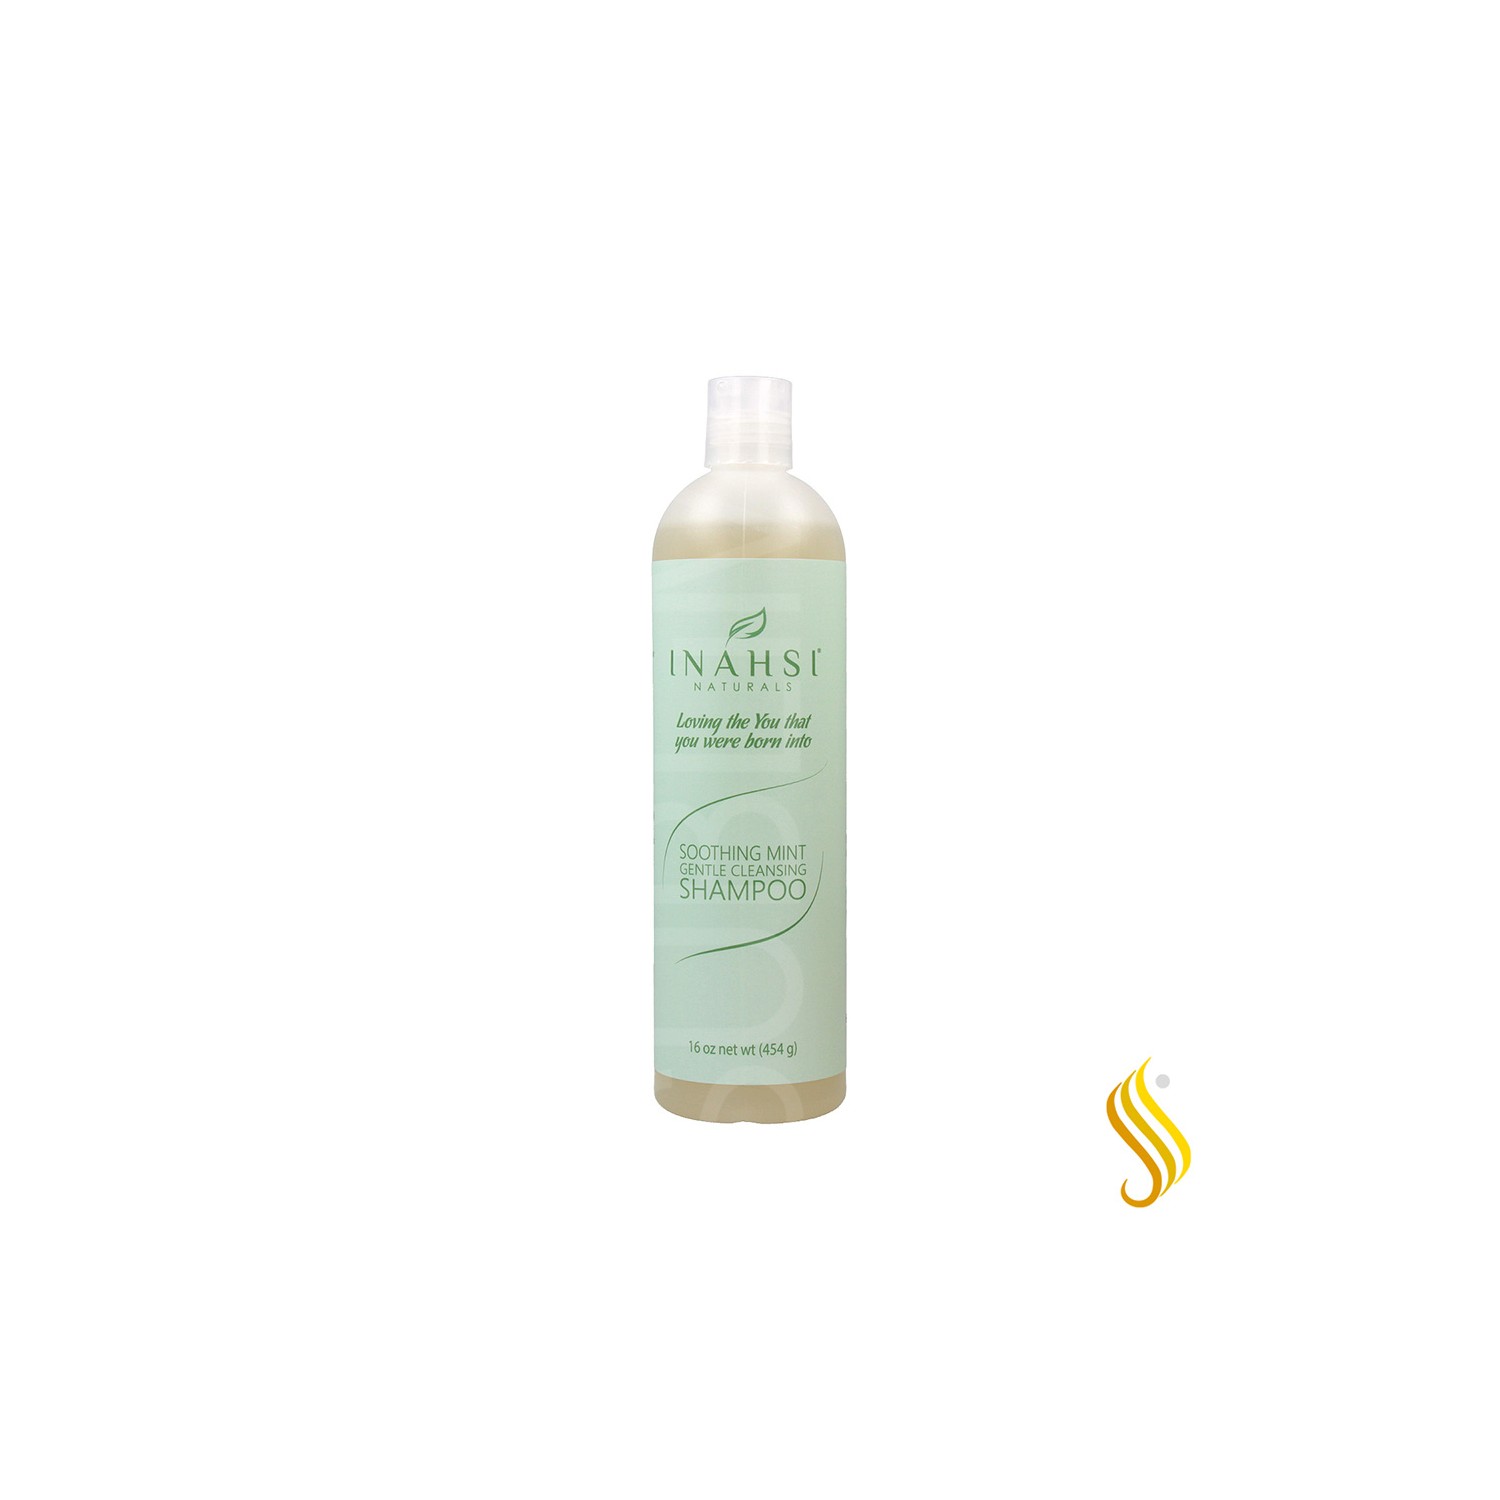 Inahsi Soothing Mint Gentle Cleansing Shampoo 454 gr